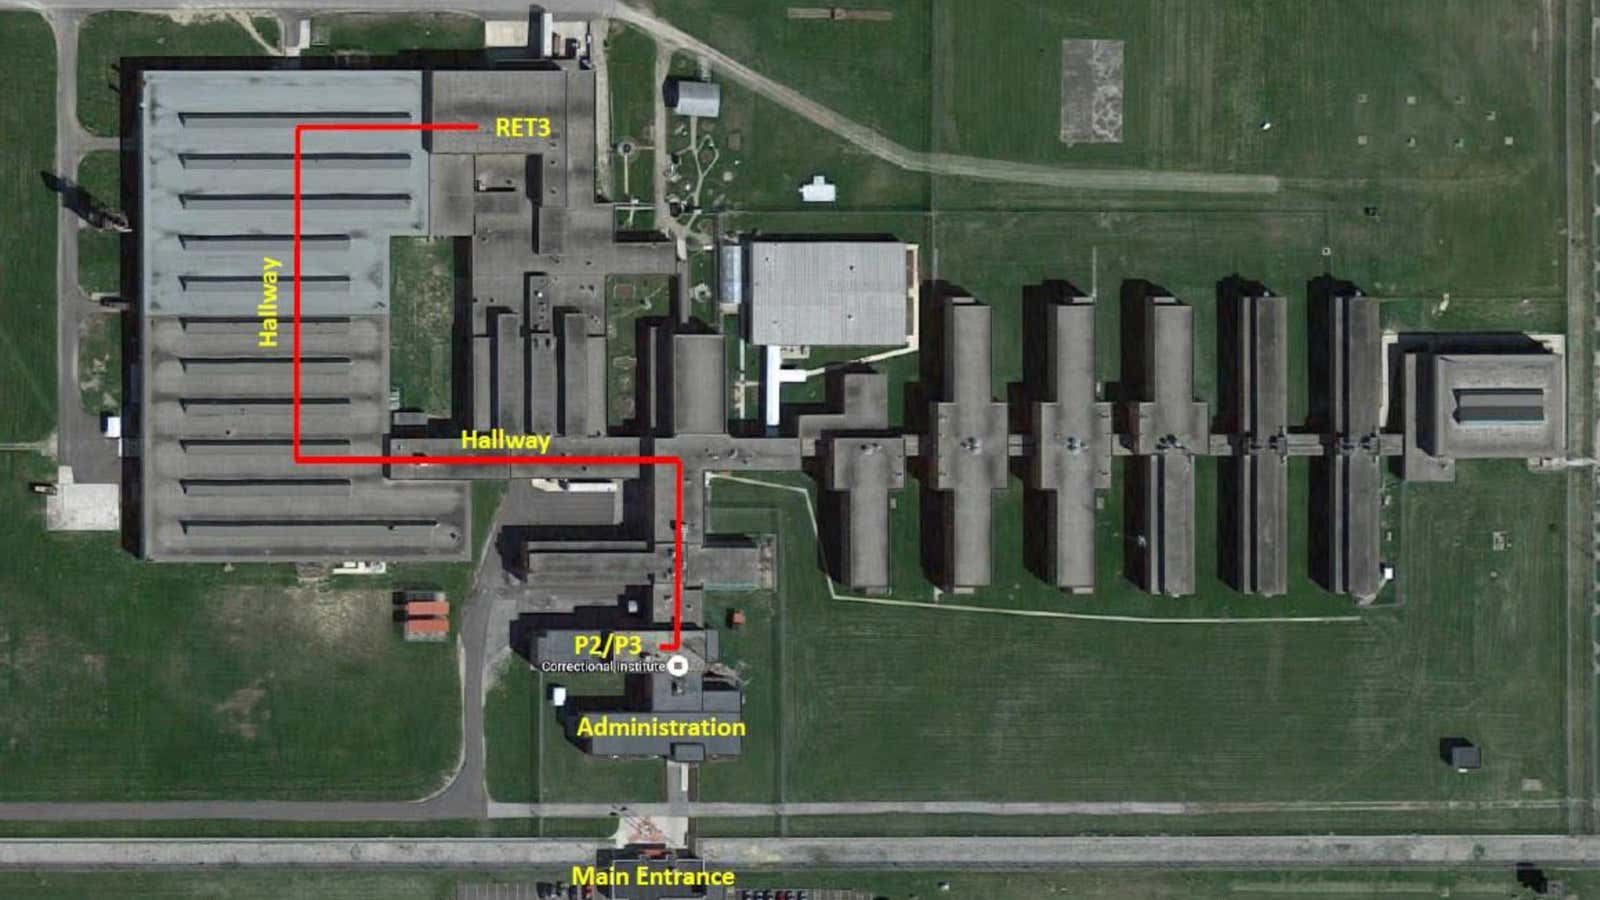 The location of hidden computers at the Marion Correctional Institution